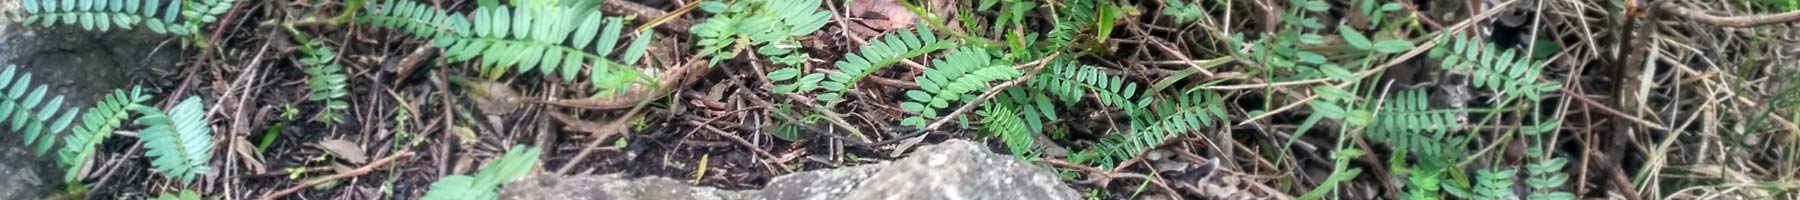 Ferns on the forest floor